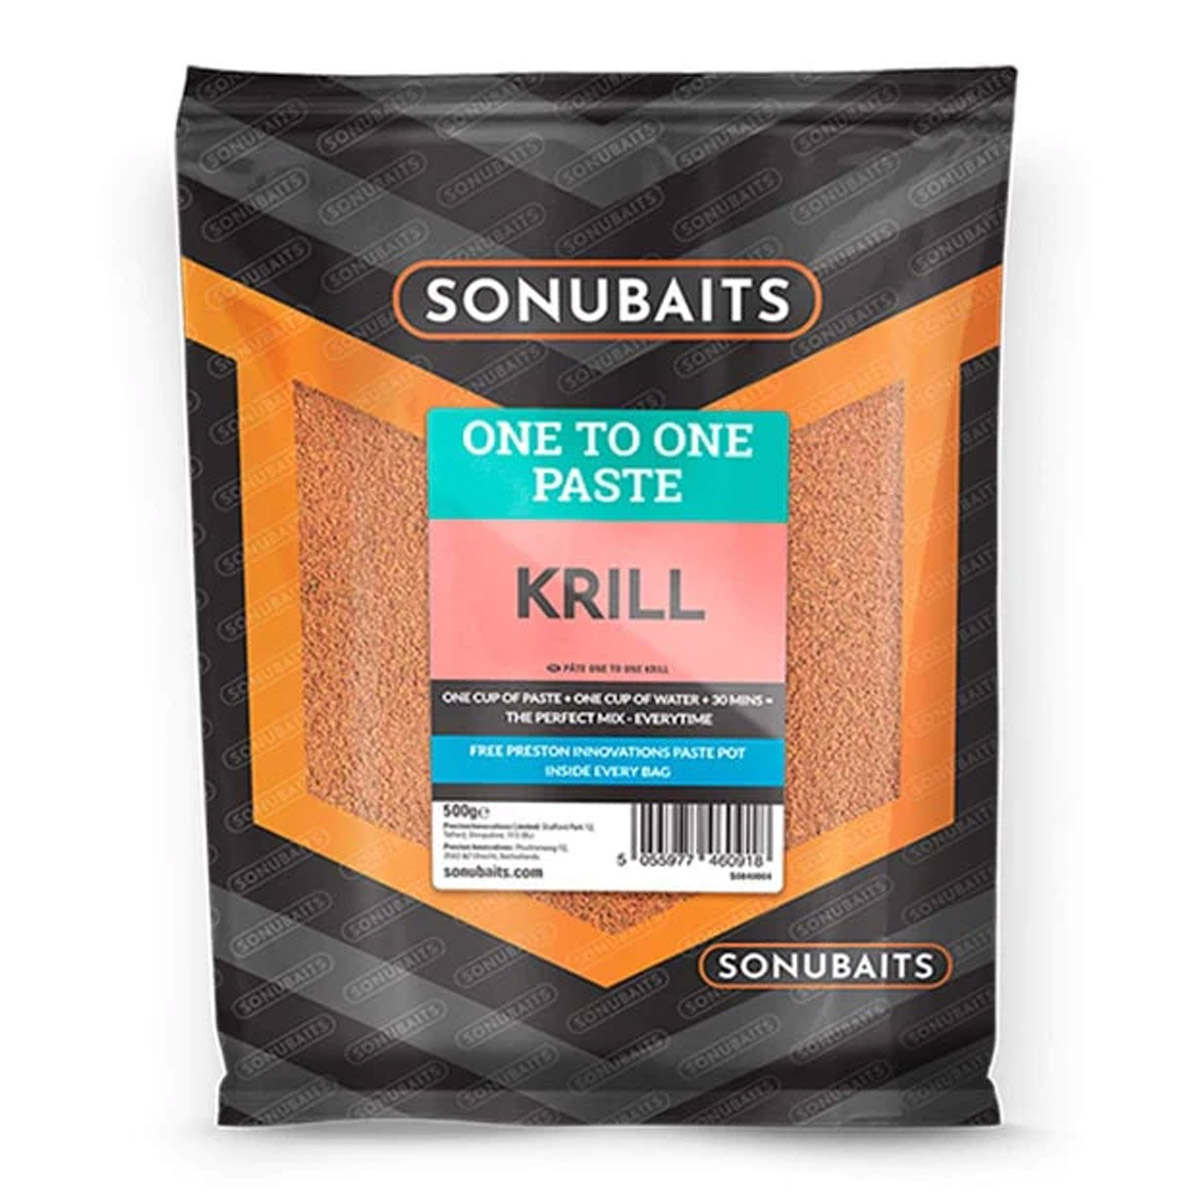 Sonubaits One To One Paste Krill